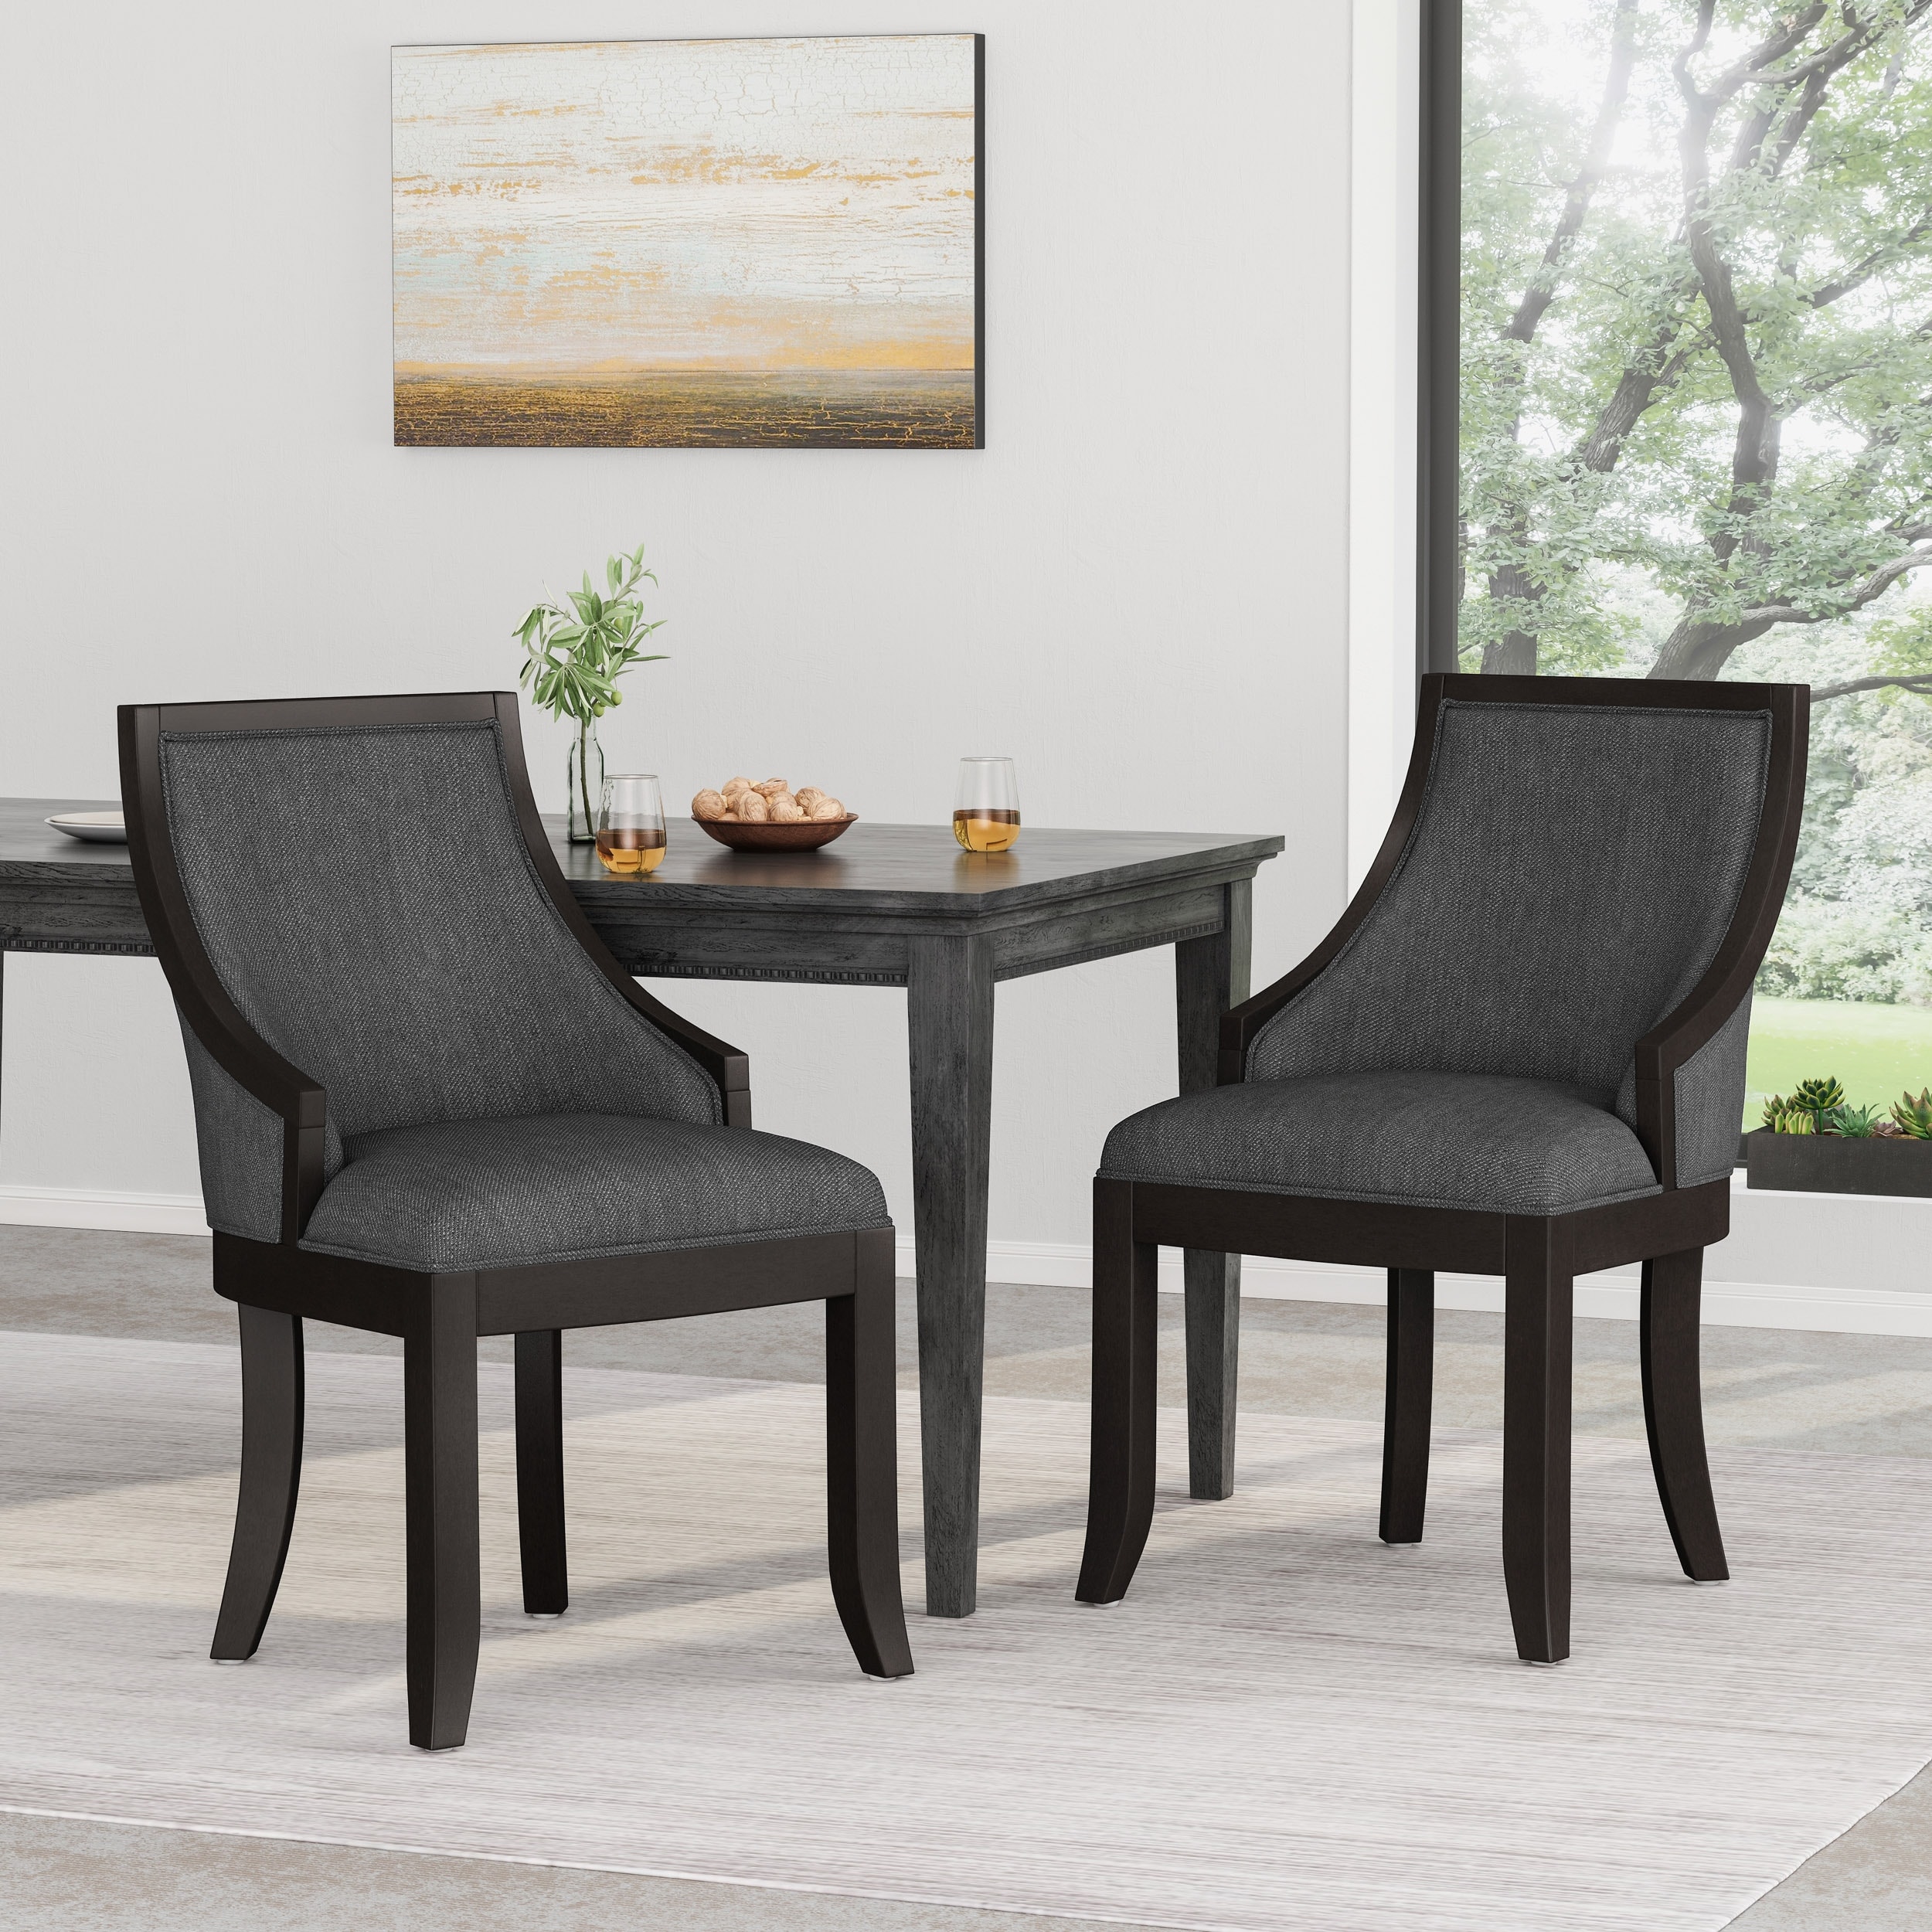 Maurers Cane and Wood Upholstered Dining Chairs (Set of 2) by Christopher  Knight Home - On Sale - Bed Bath & Beyond - 36176187